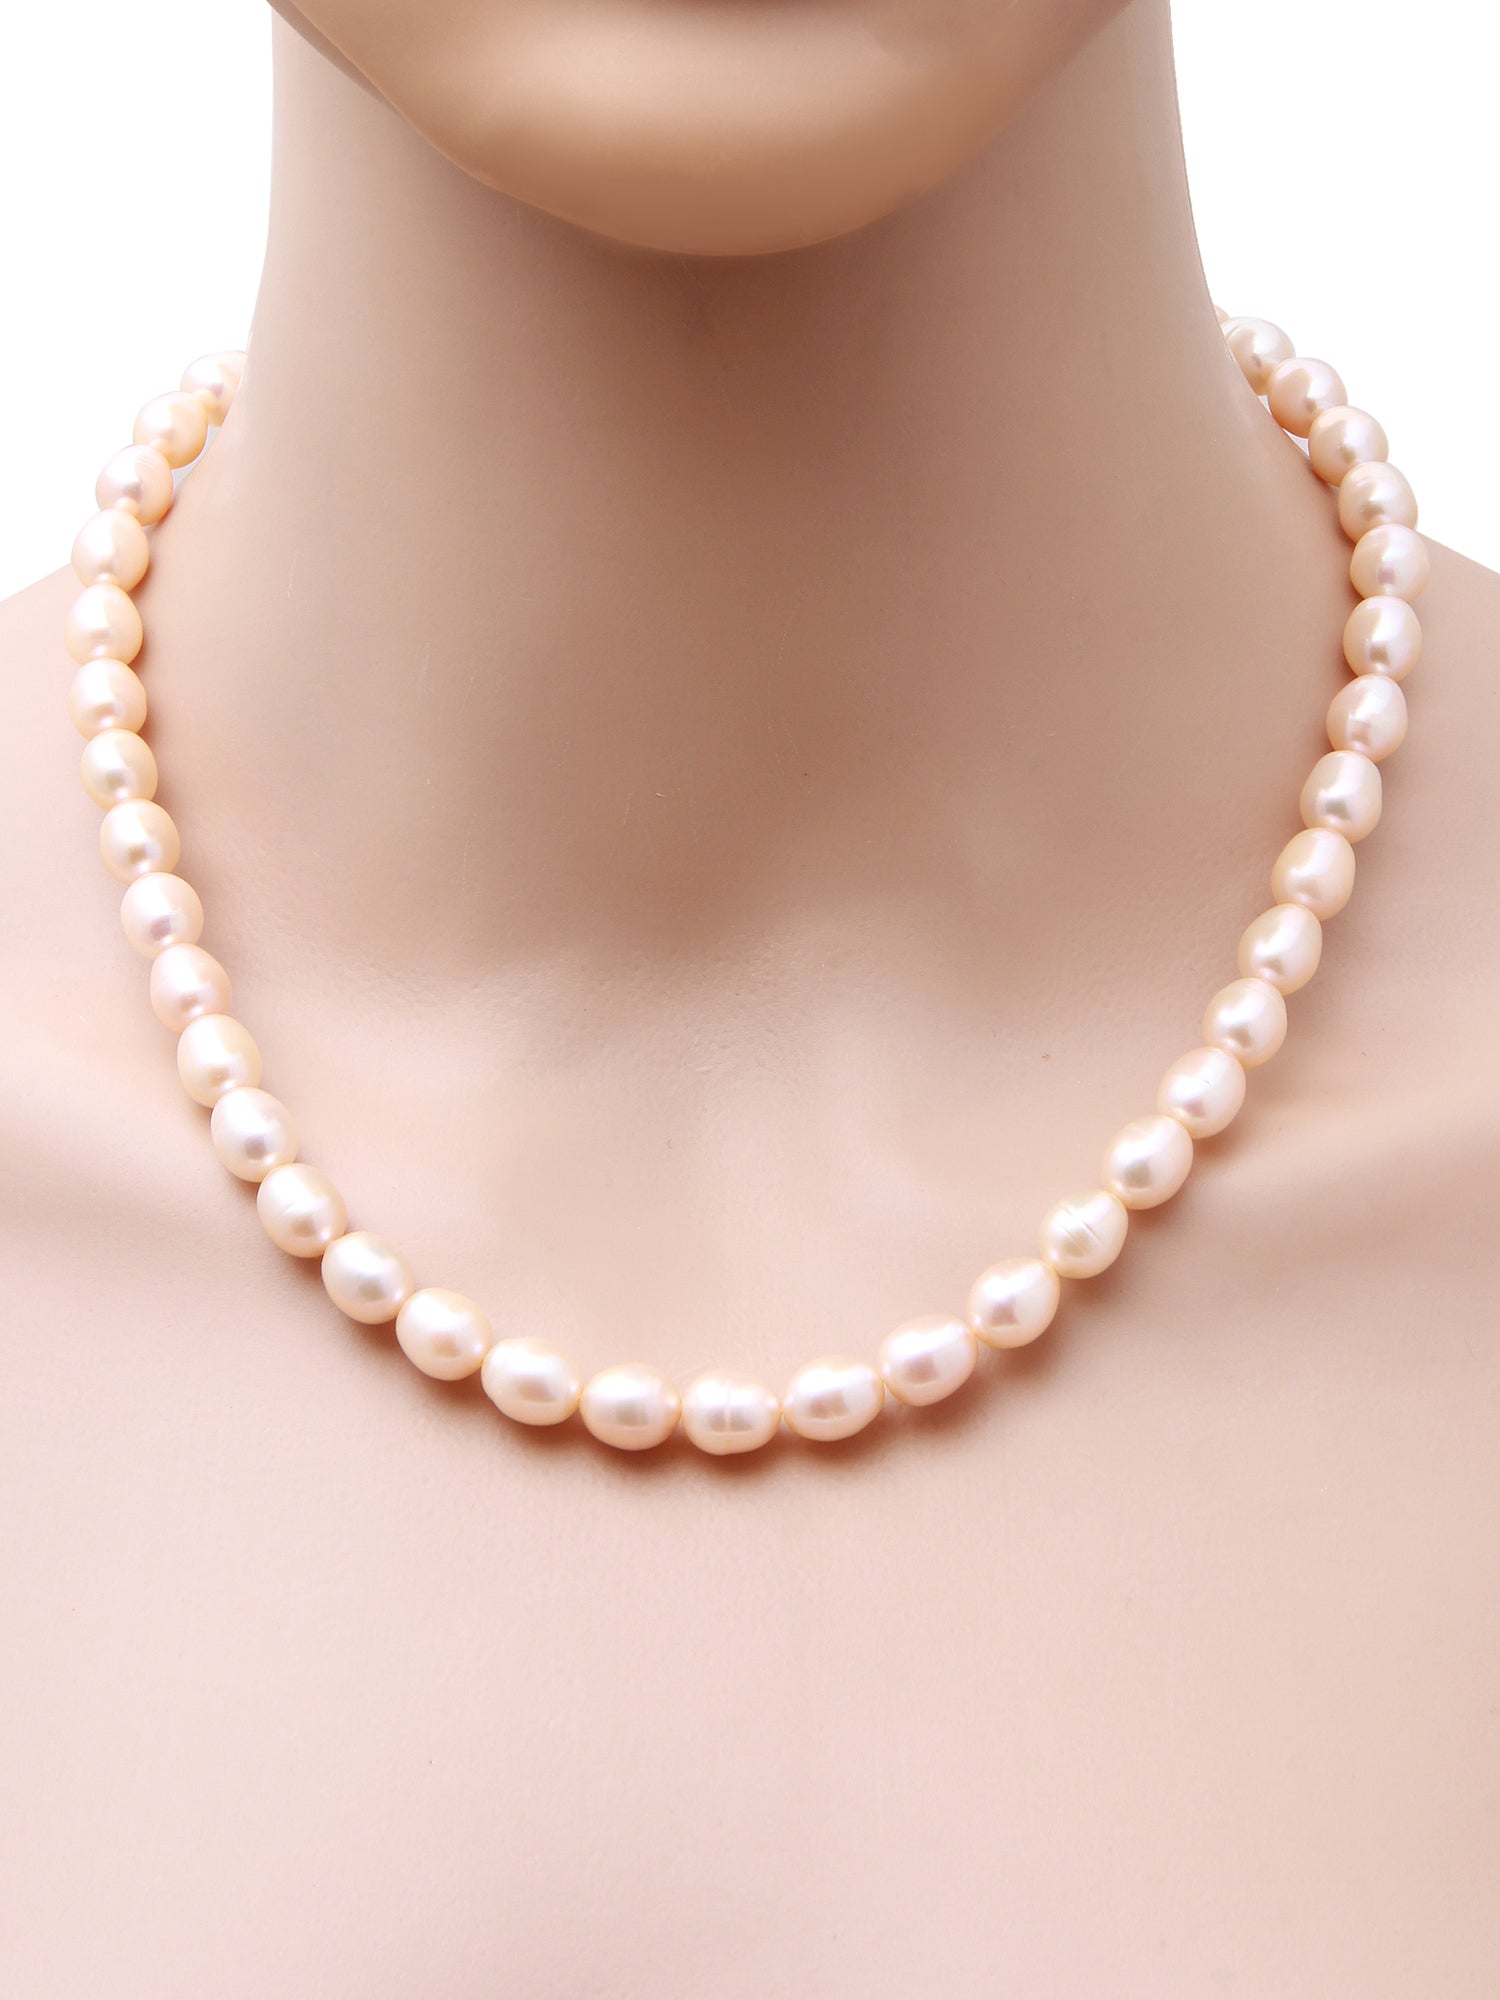 Oval (8mm by 10mm) Pink Freshwater Pearl Necklace, 200 carats - (F1006)